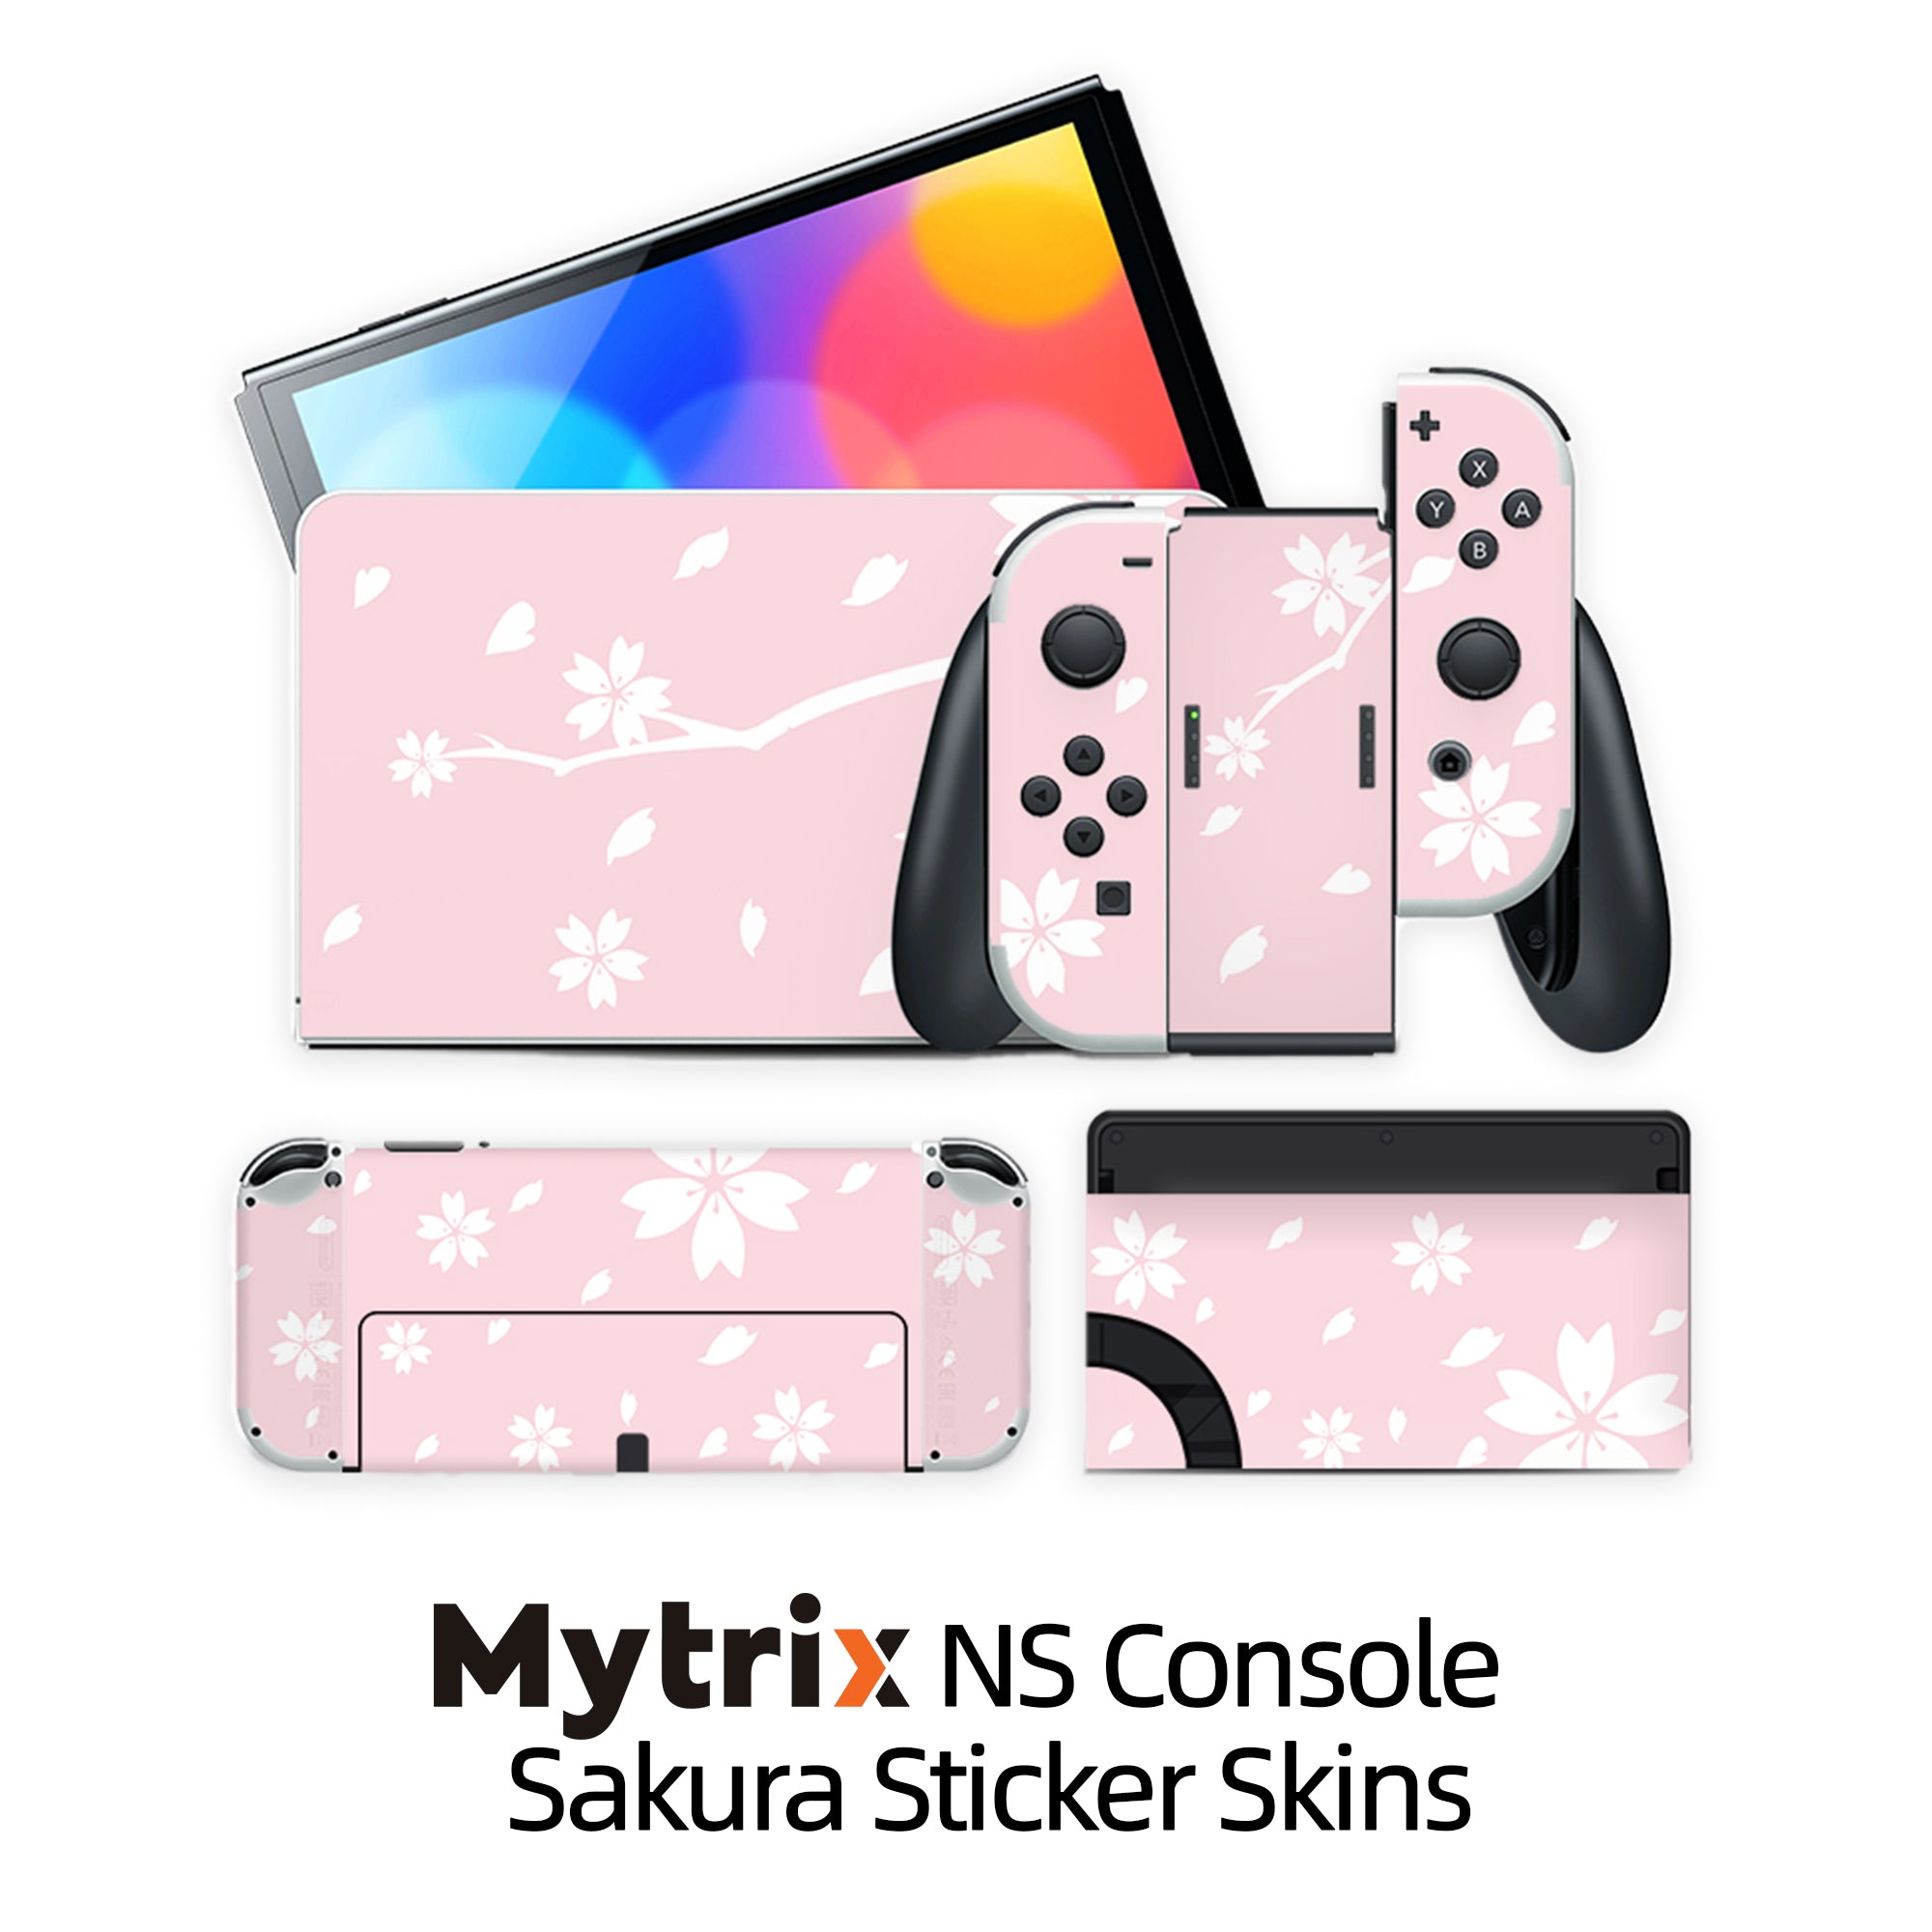 2022 New Nintendo Switch OLED Model Neon Red Blue with The Legend of Zelda: Skyward Sword HD and Mytrix Full Body Skin Sticker for NS OLED Console, Dock and Joycons - Sakura Pink